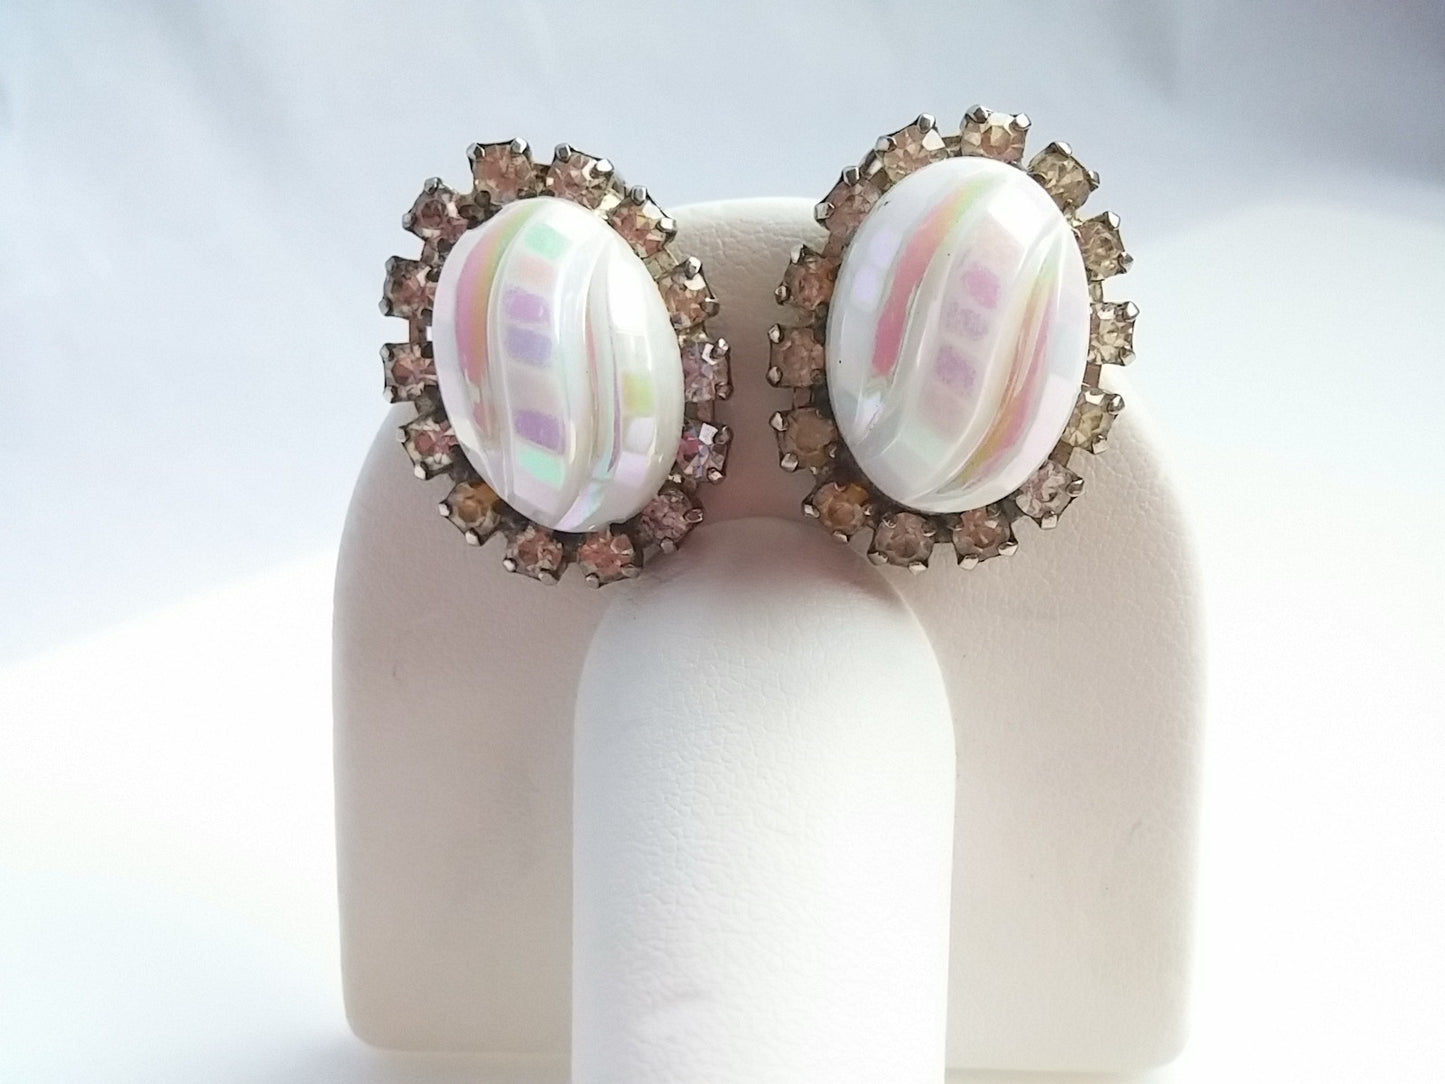 Vintage 50s Earrings Carved Opalescence Center with Clear Rhinestone Trim - Dirty 30 Vintage | Vintage Clothing, Vintage Jewelry, Vintage Accessories